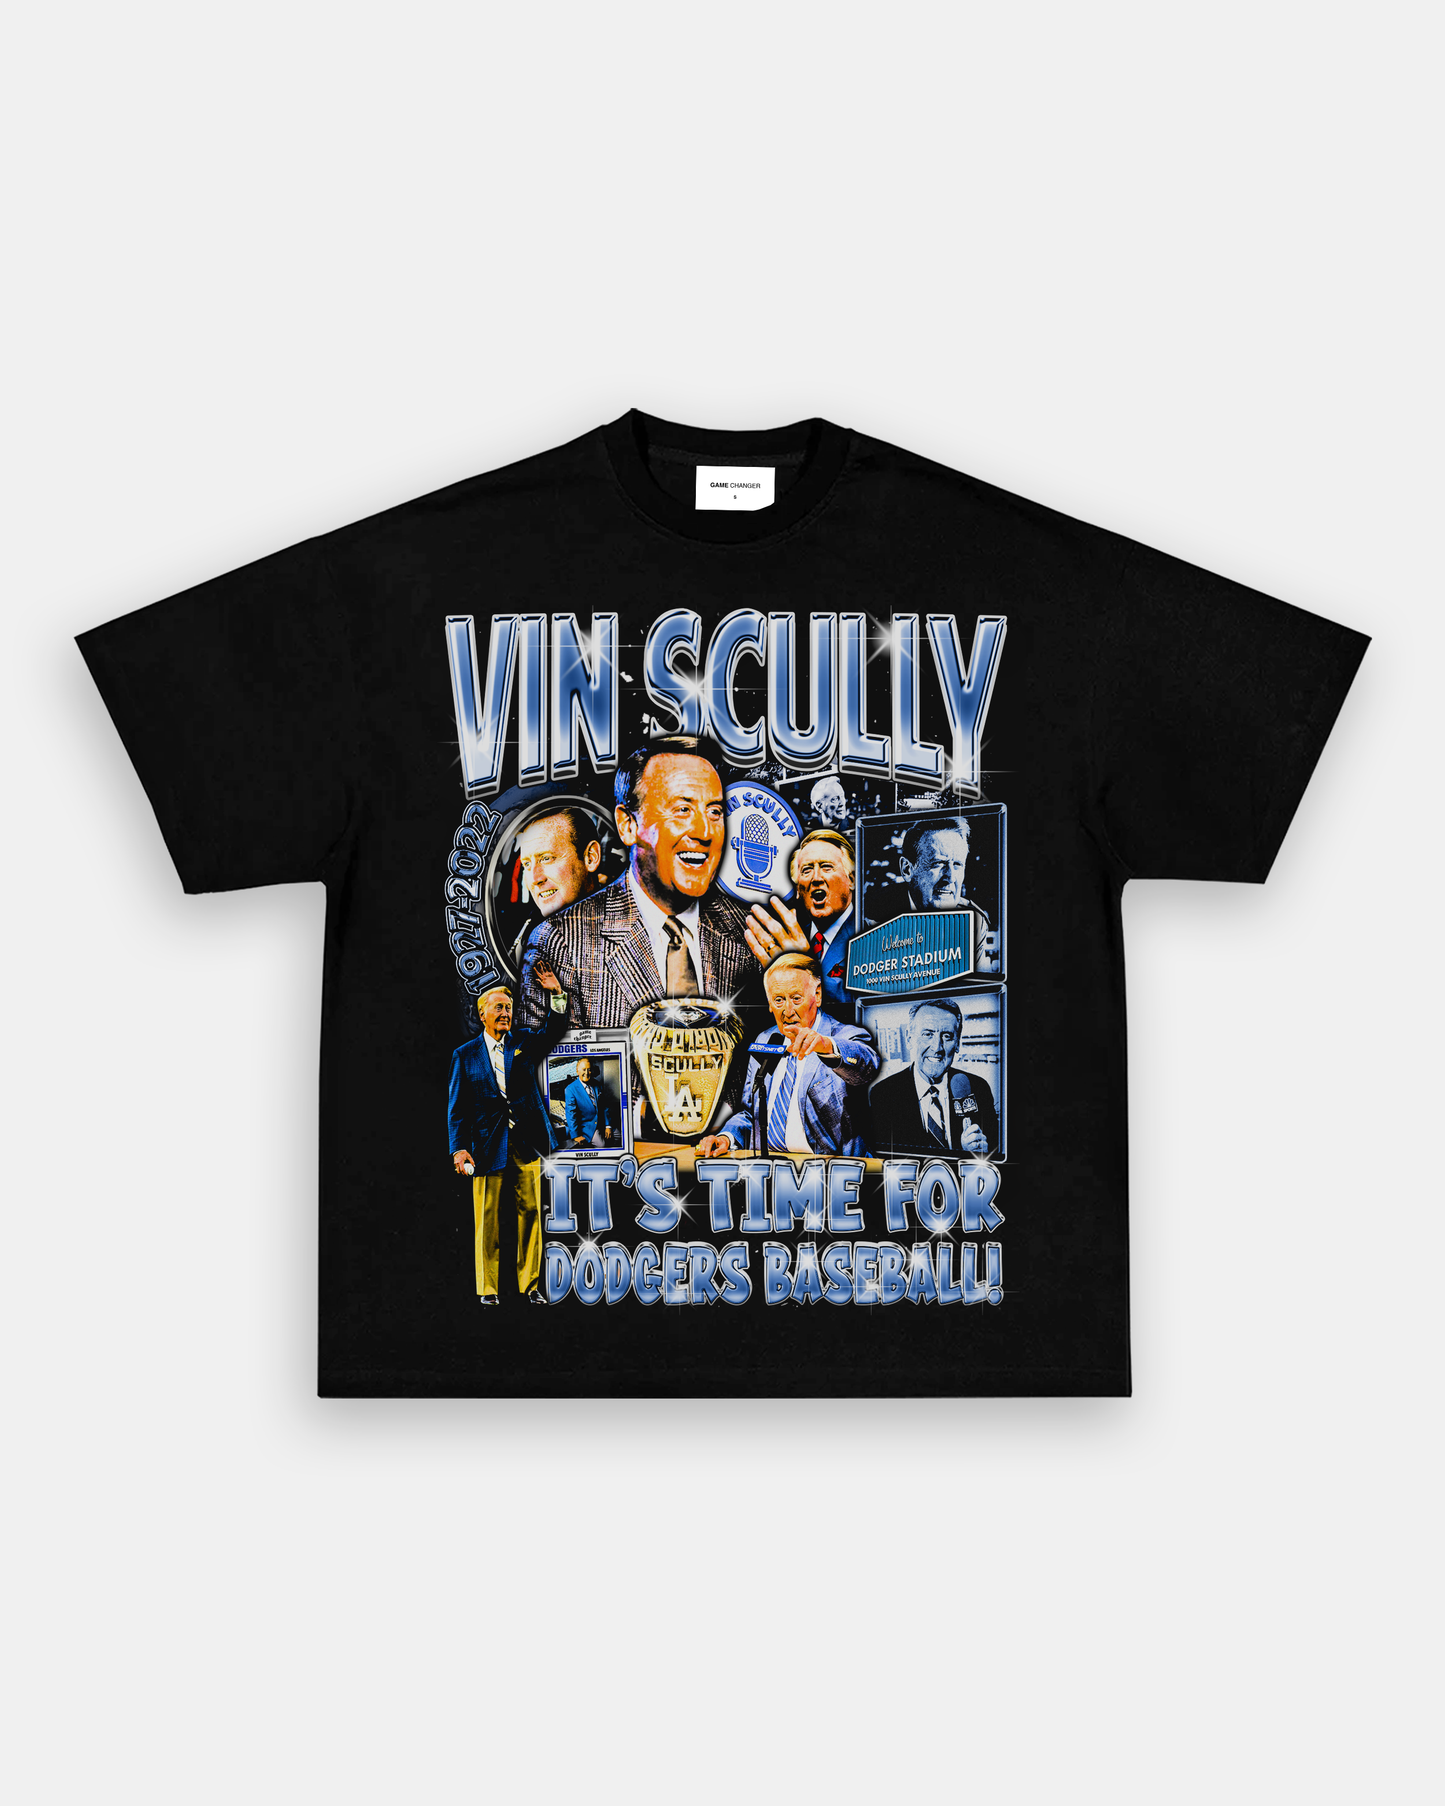 VIN SCULLY TEE